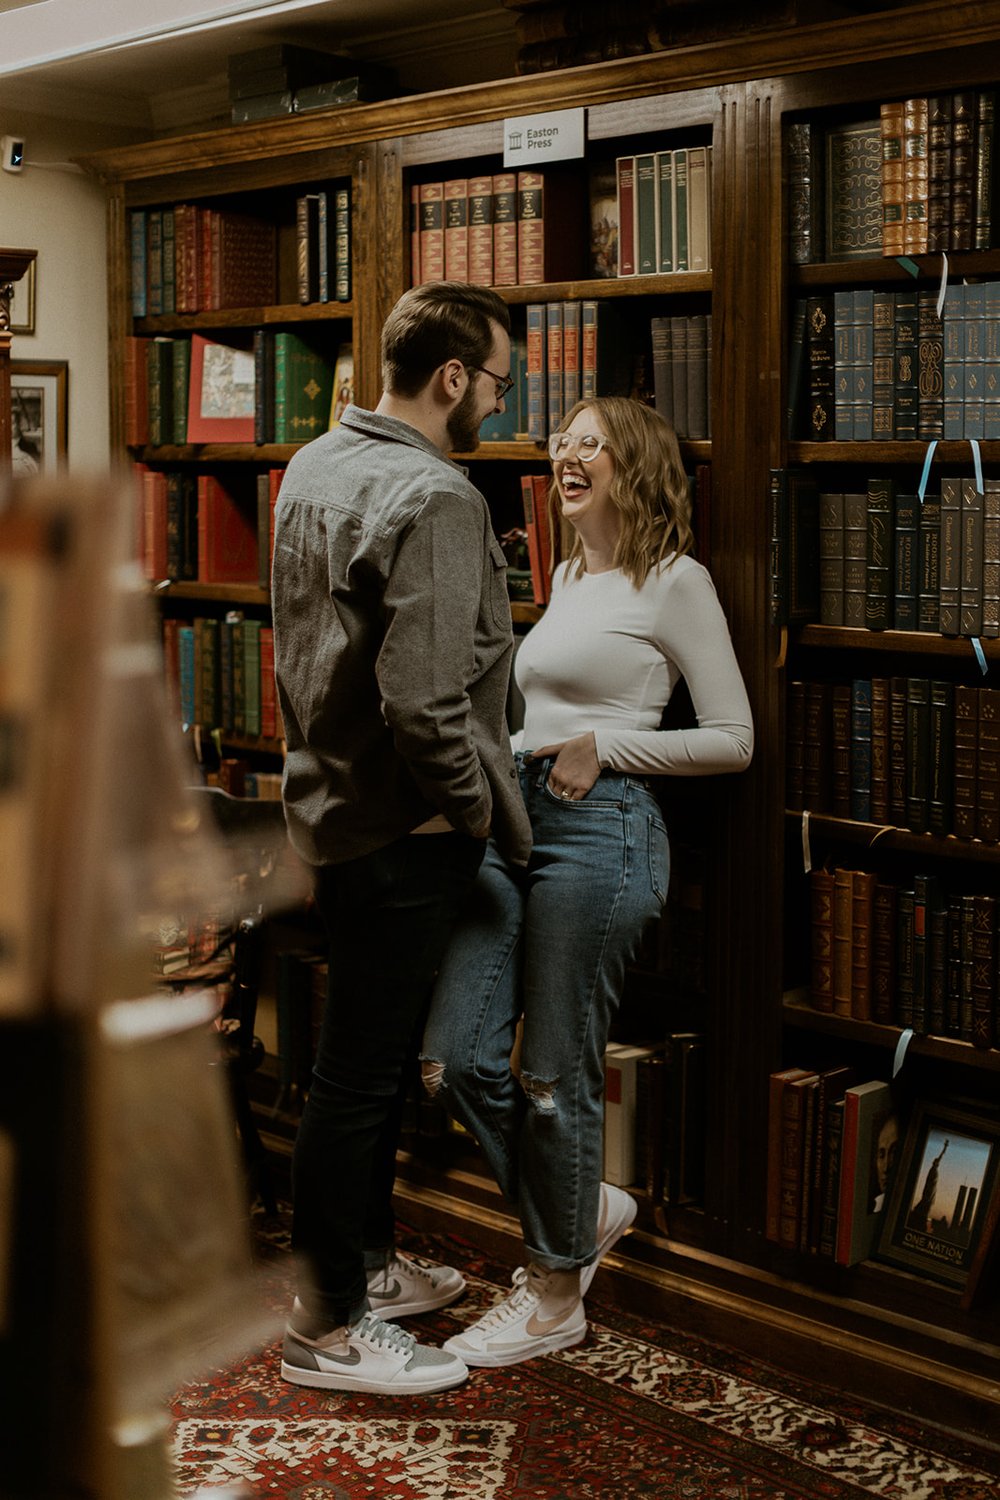 Nicole laughs with her fiance in their favorite book store